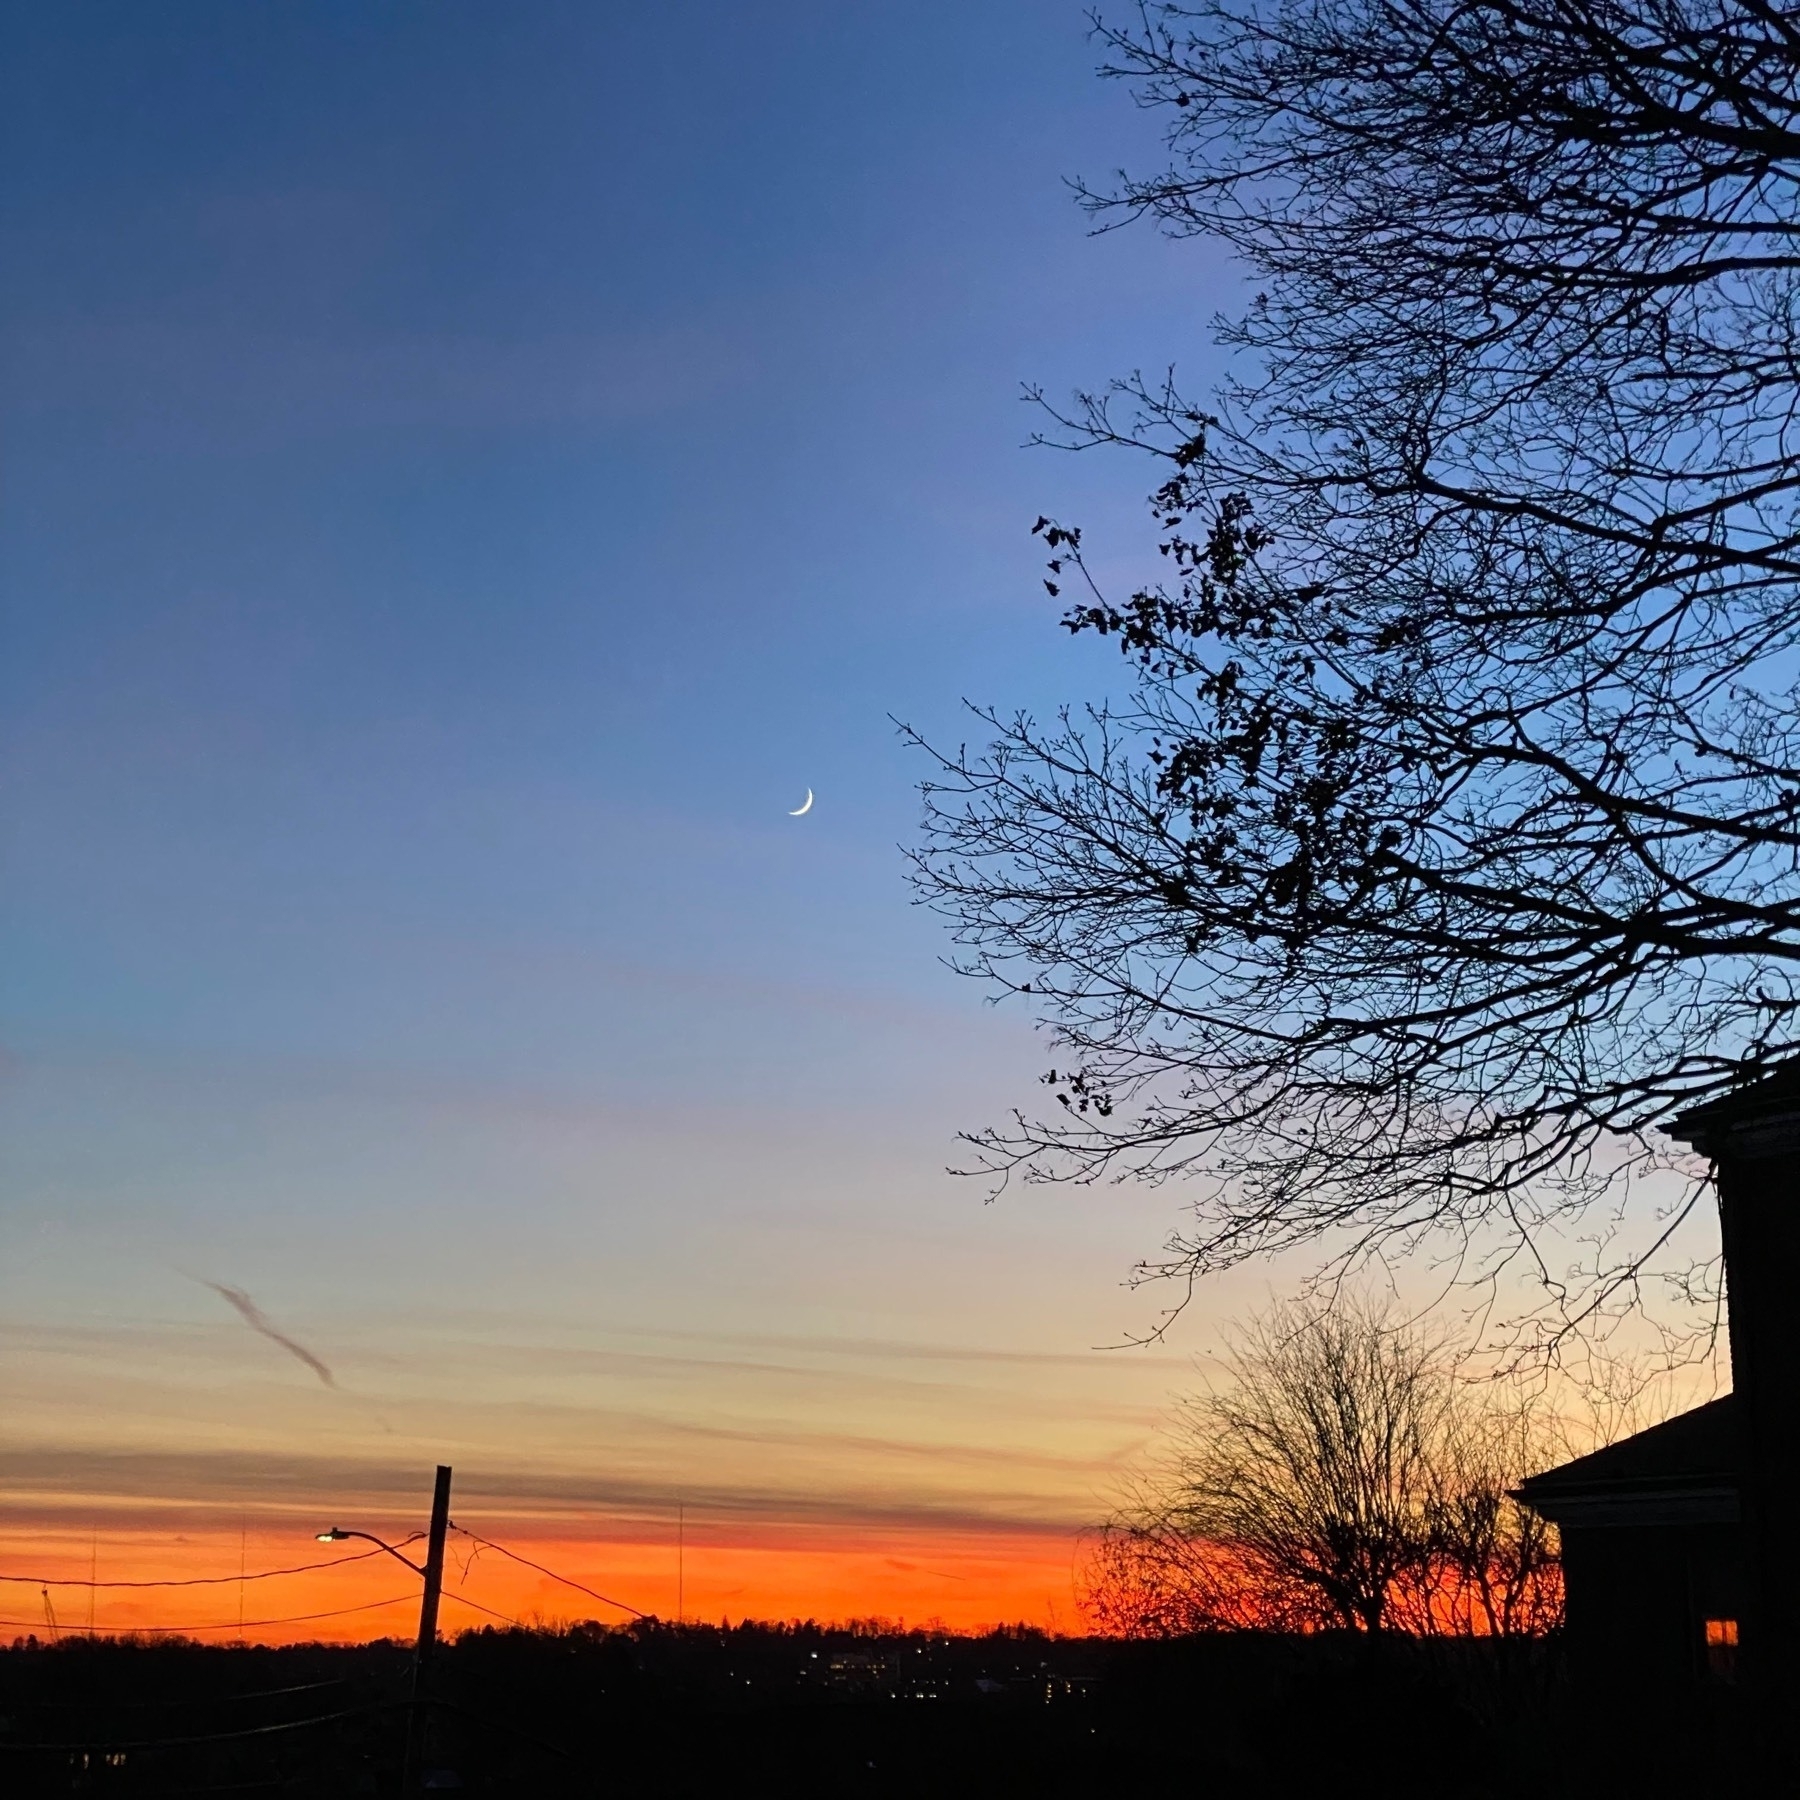 View of a sunset with brigh orange sky at the horizon, deep blue sky above, and the small cresent moon near the outline of tree branches on the right.